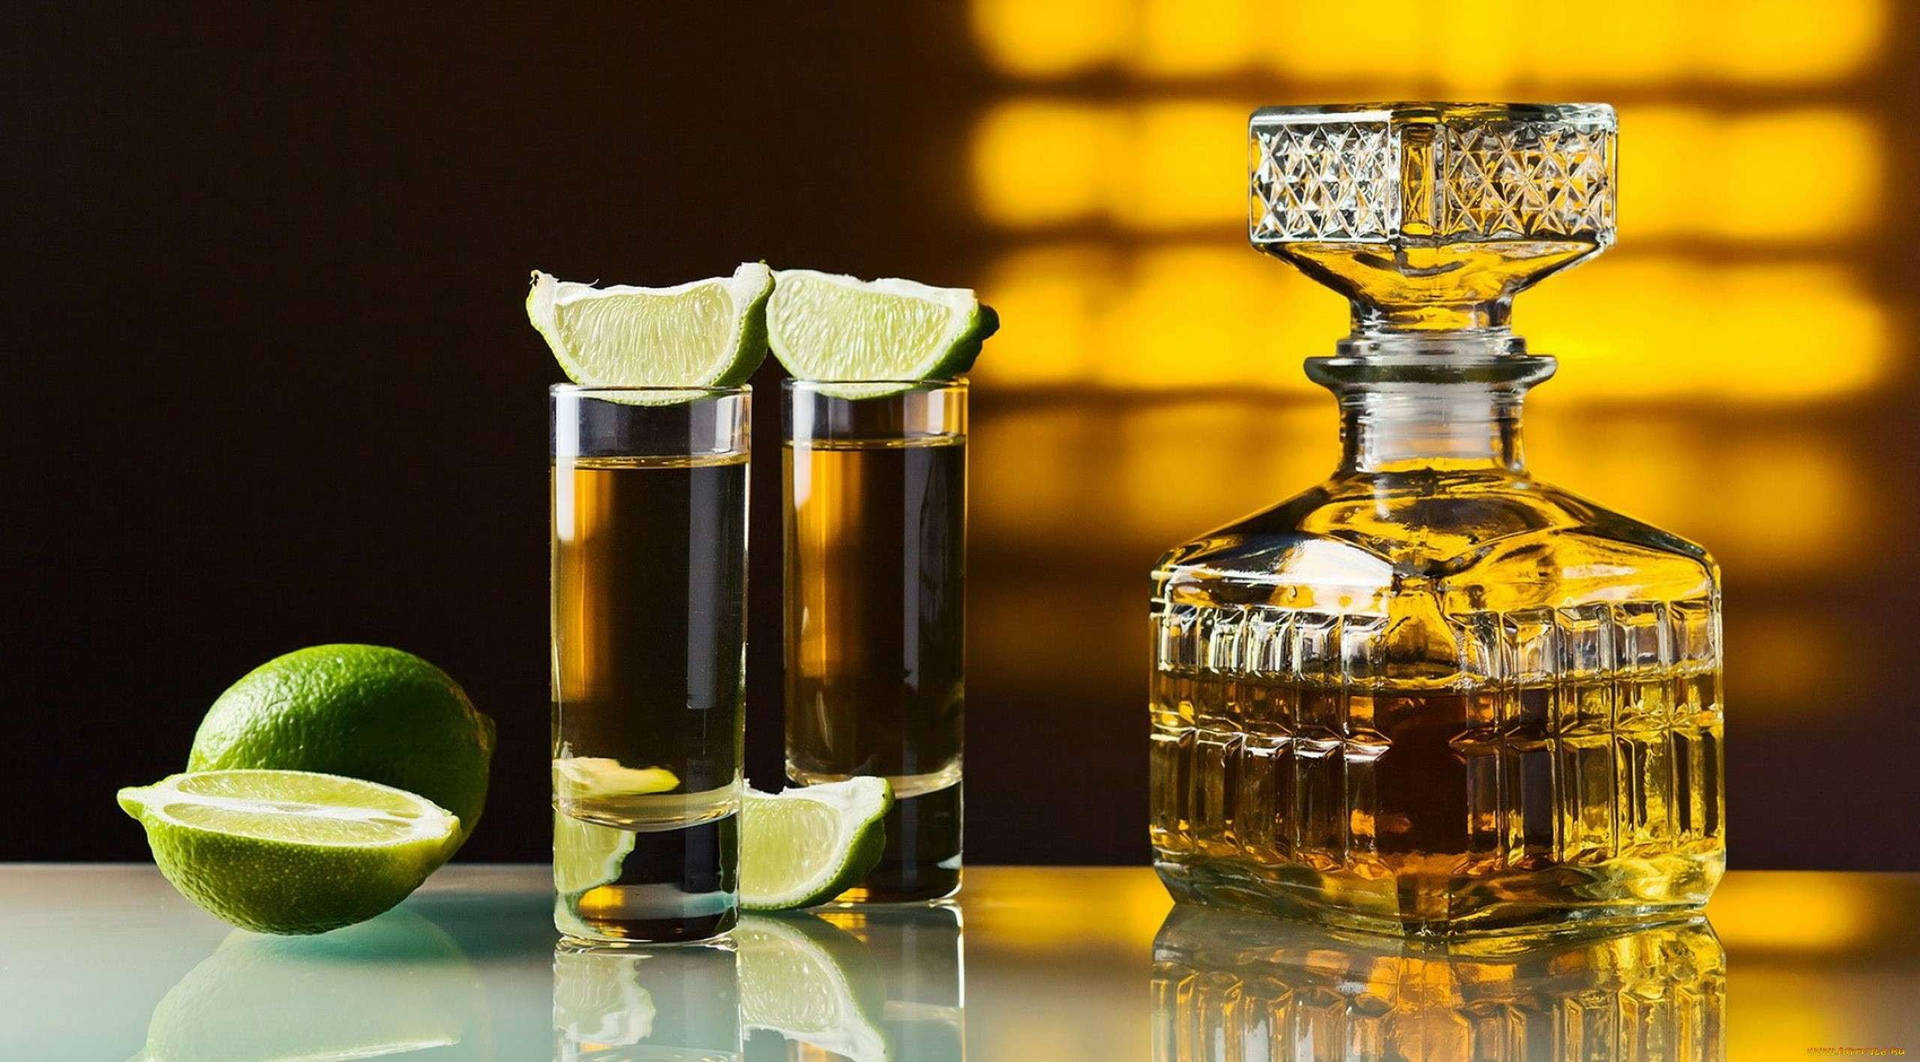 Square Tequila Bottle With Limes Wallpaper